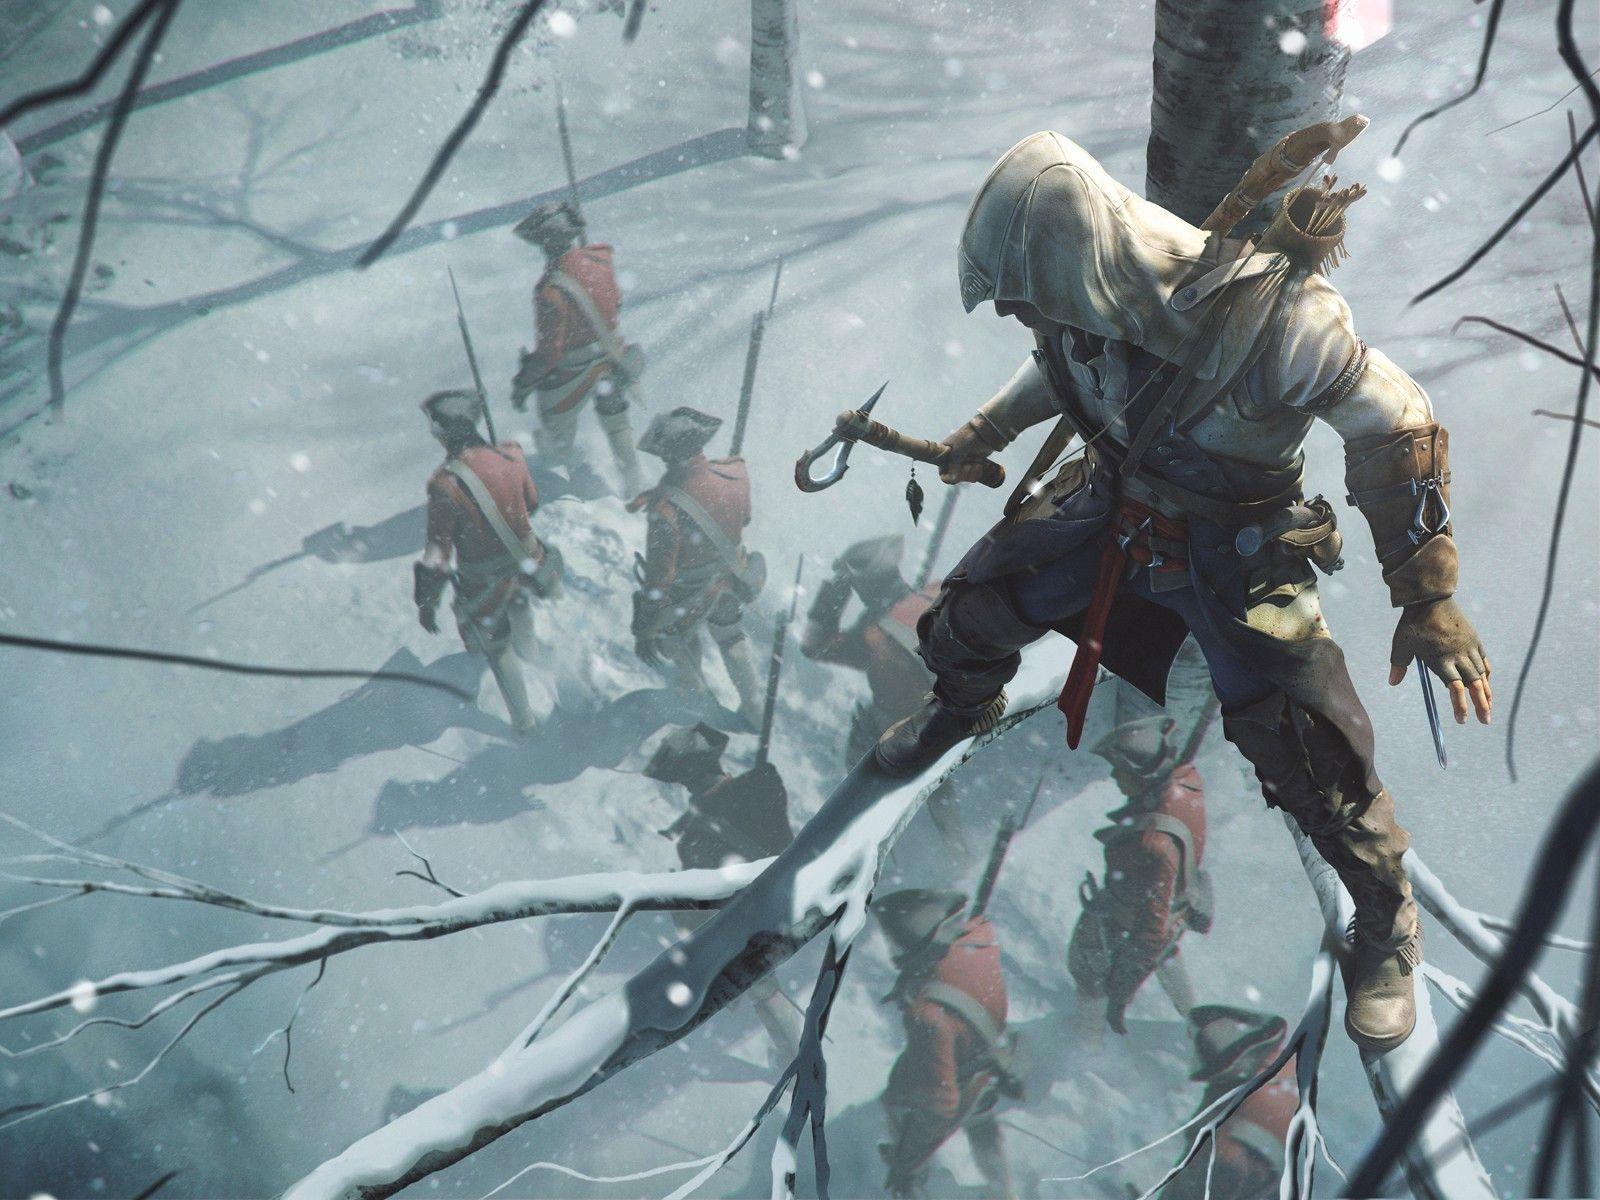 Aciii 3 Wallpaper Luxury assassins Creed 3 Bow and Arrow Wallpaper